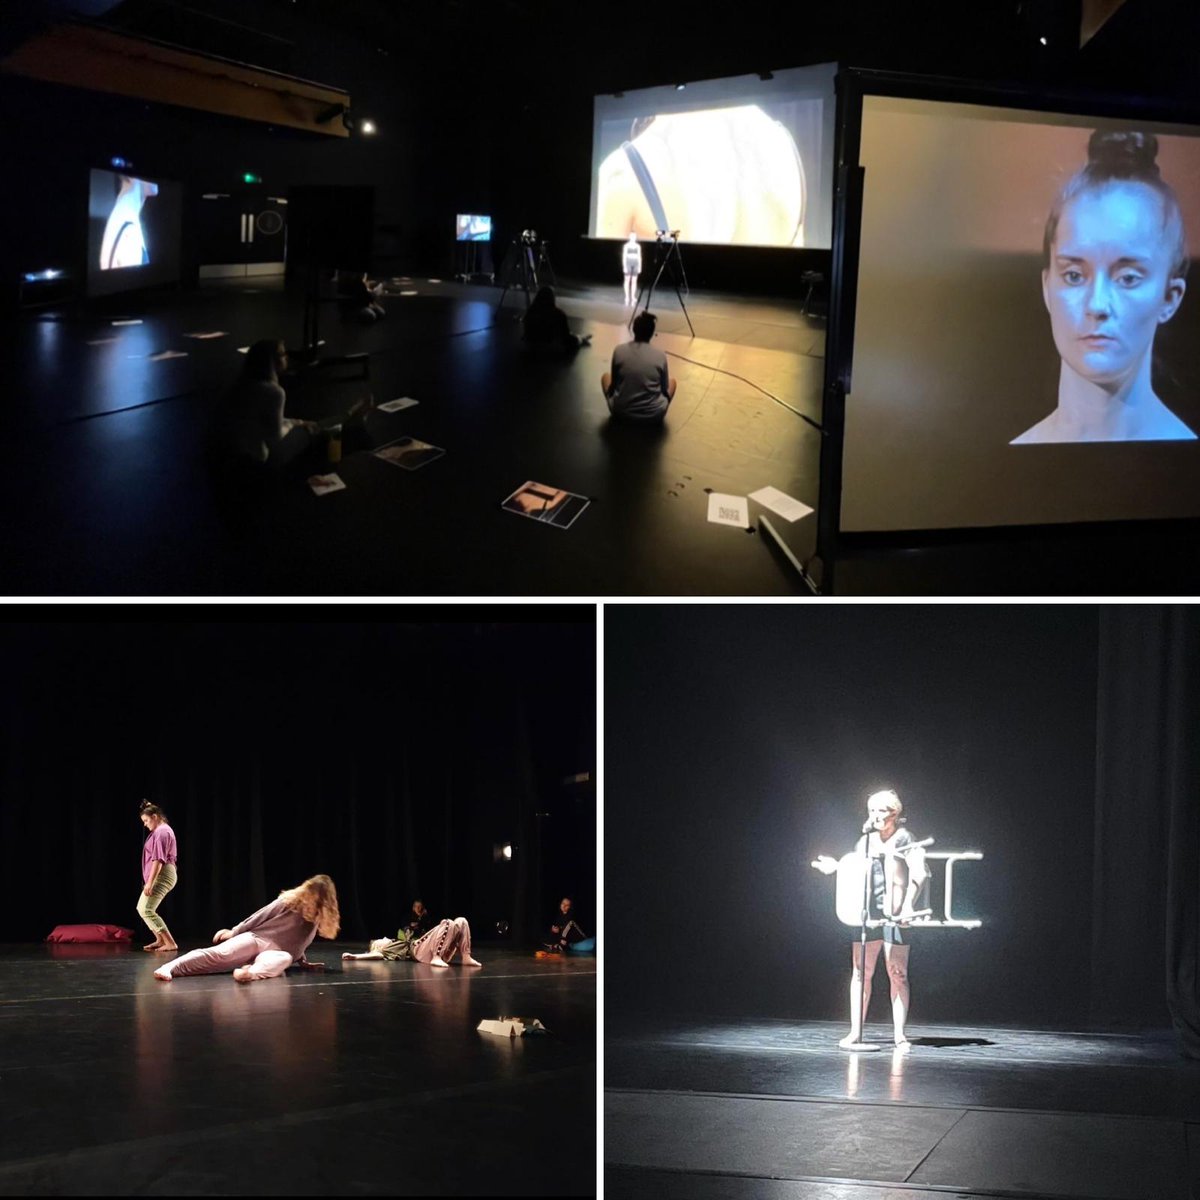 Today we are looking back at some of the exciting Final Projects produced by our talented MA students! #practiceasresearch #postgraduate #artist #dance  #lincoln #university #choreography #performance #dancemakers @LouiseKirstyn @ArinabDance @georgiawood22